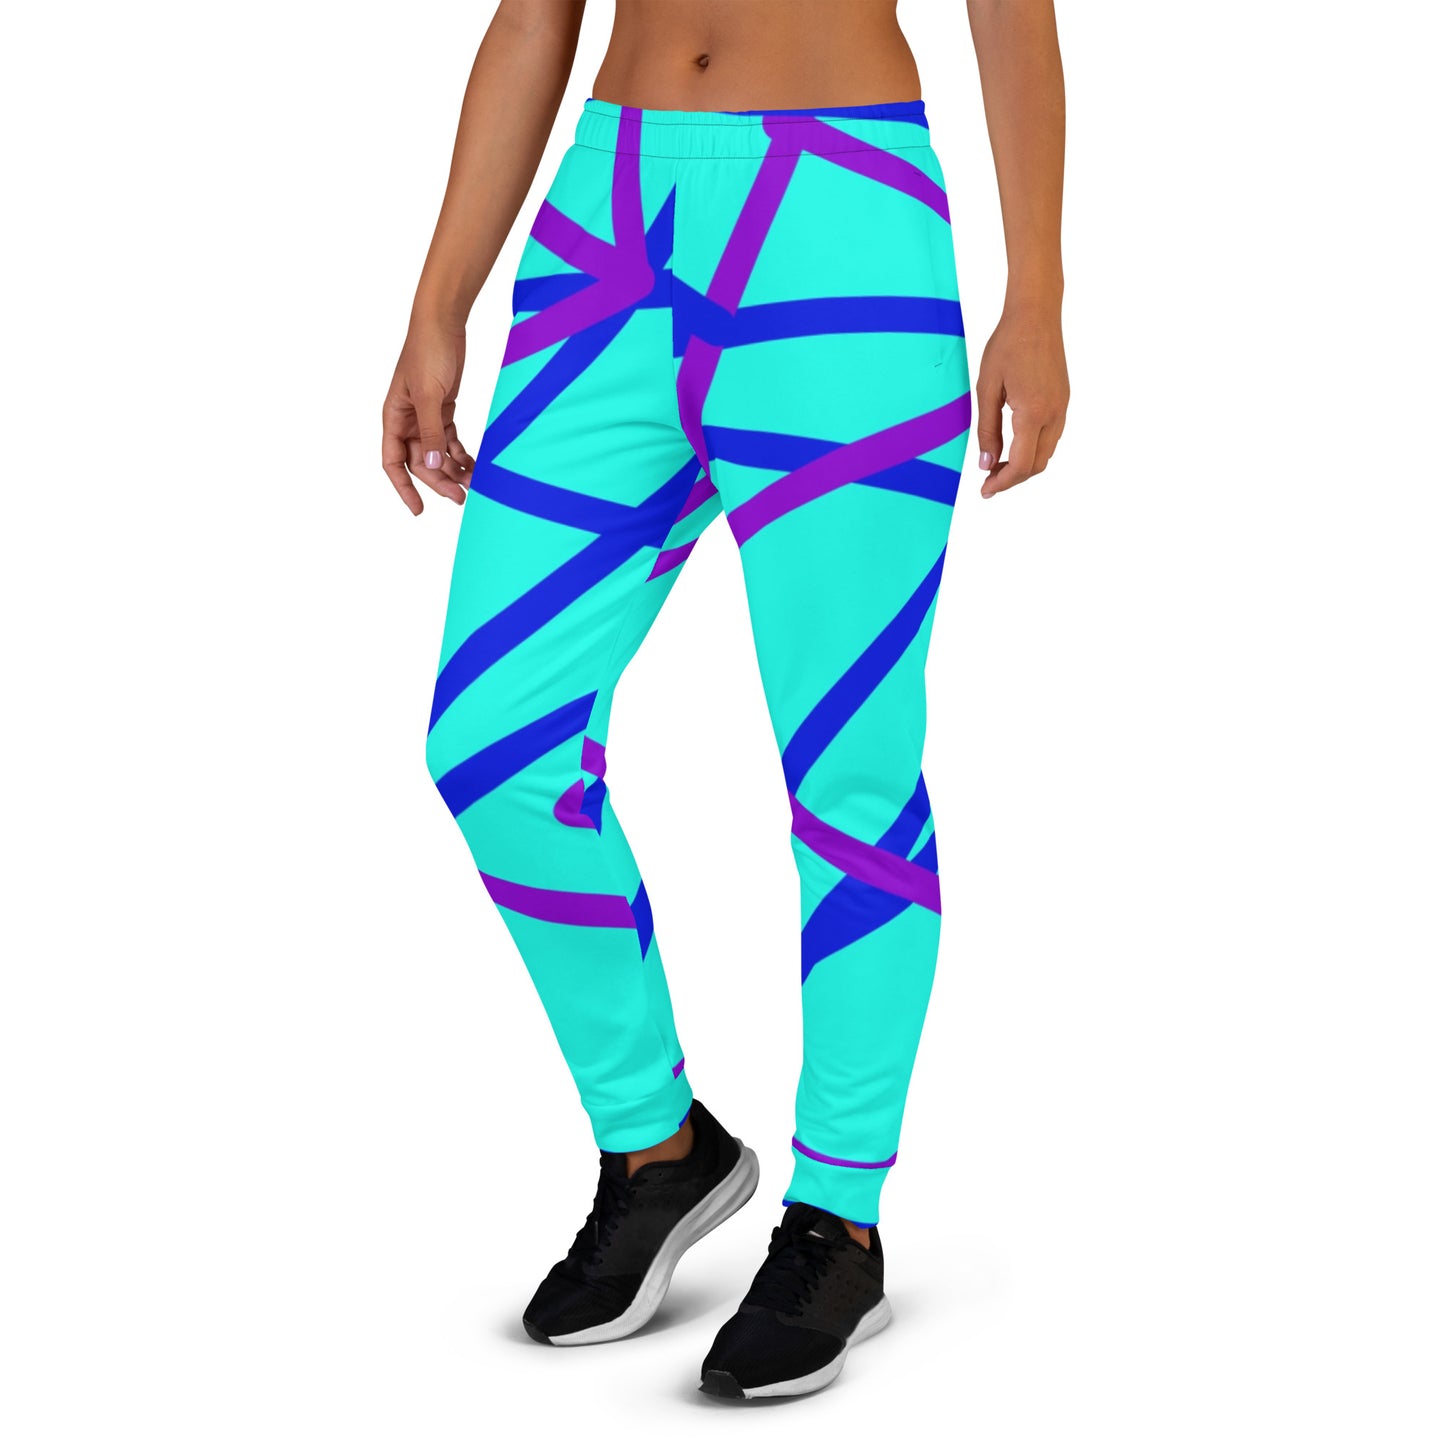 Women's "Why Not" Joggers